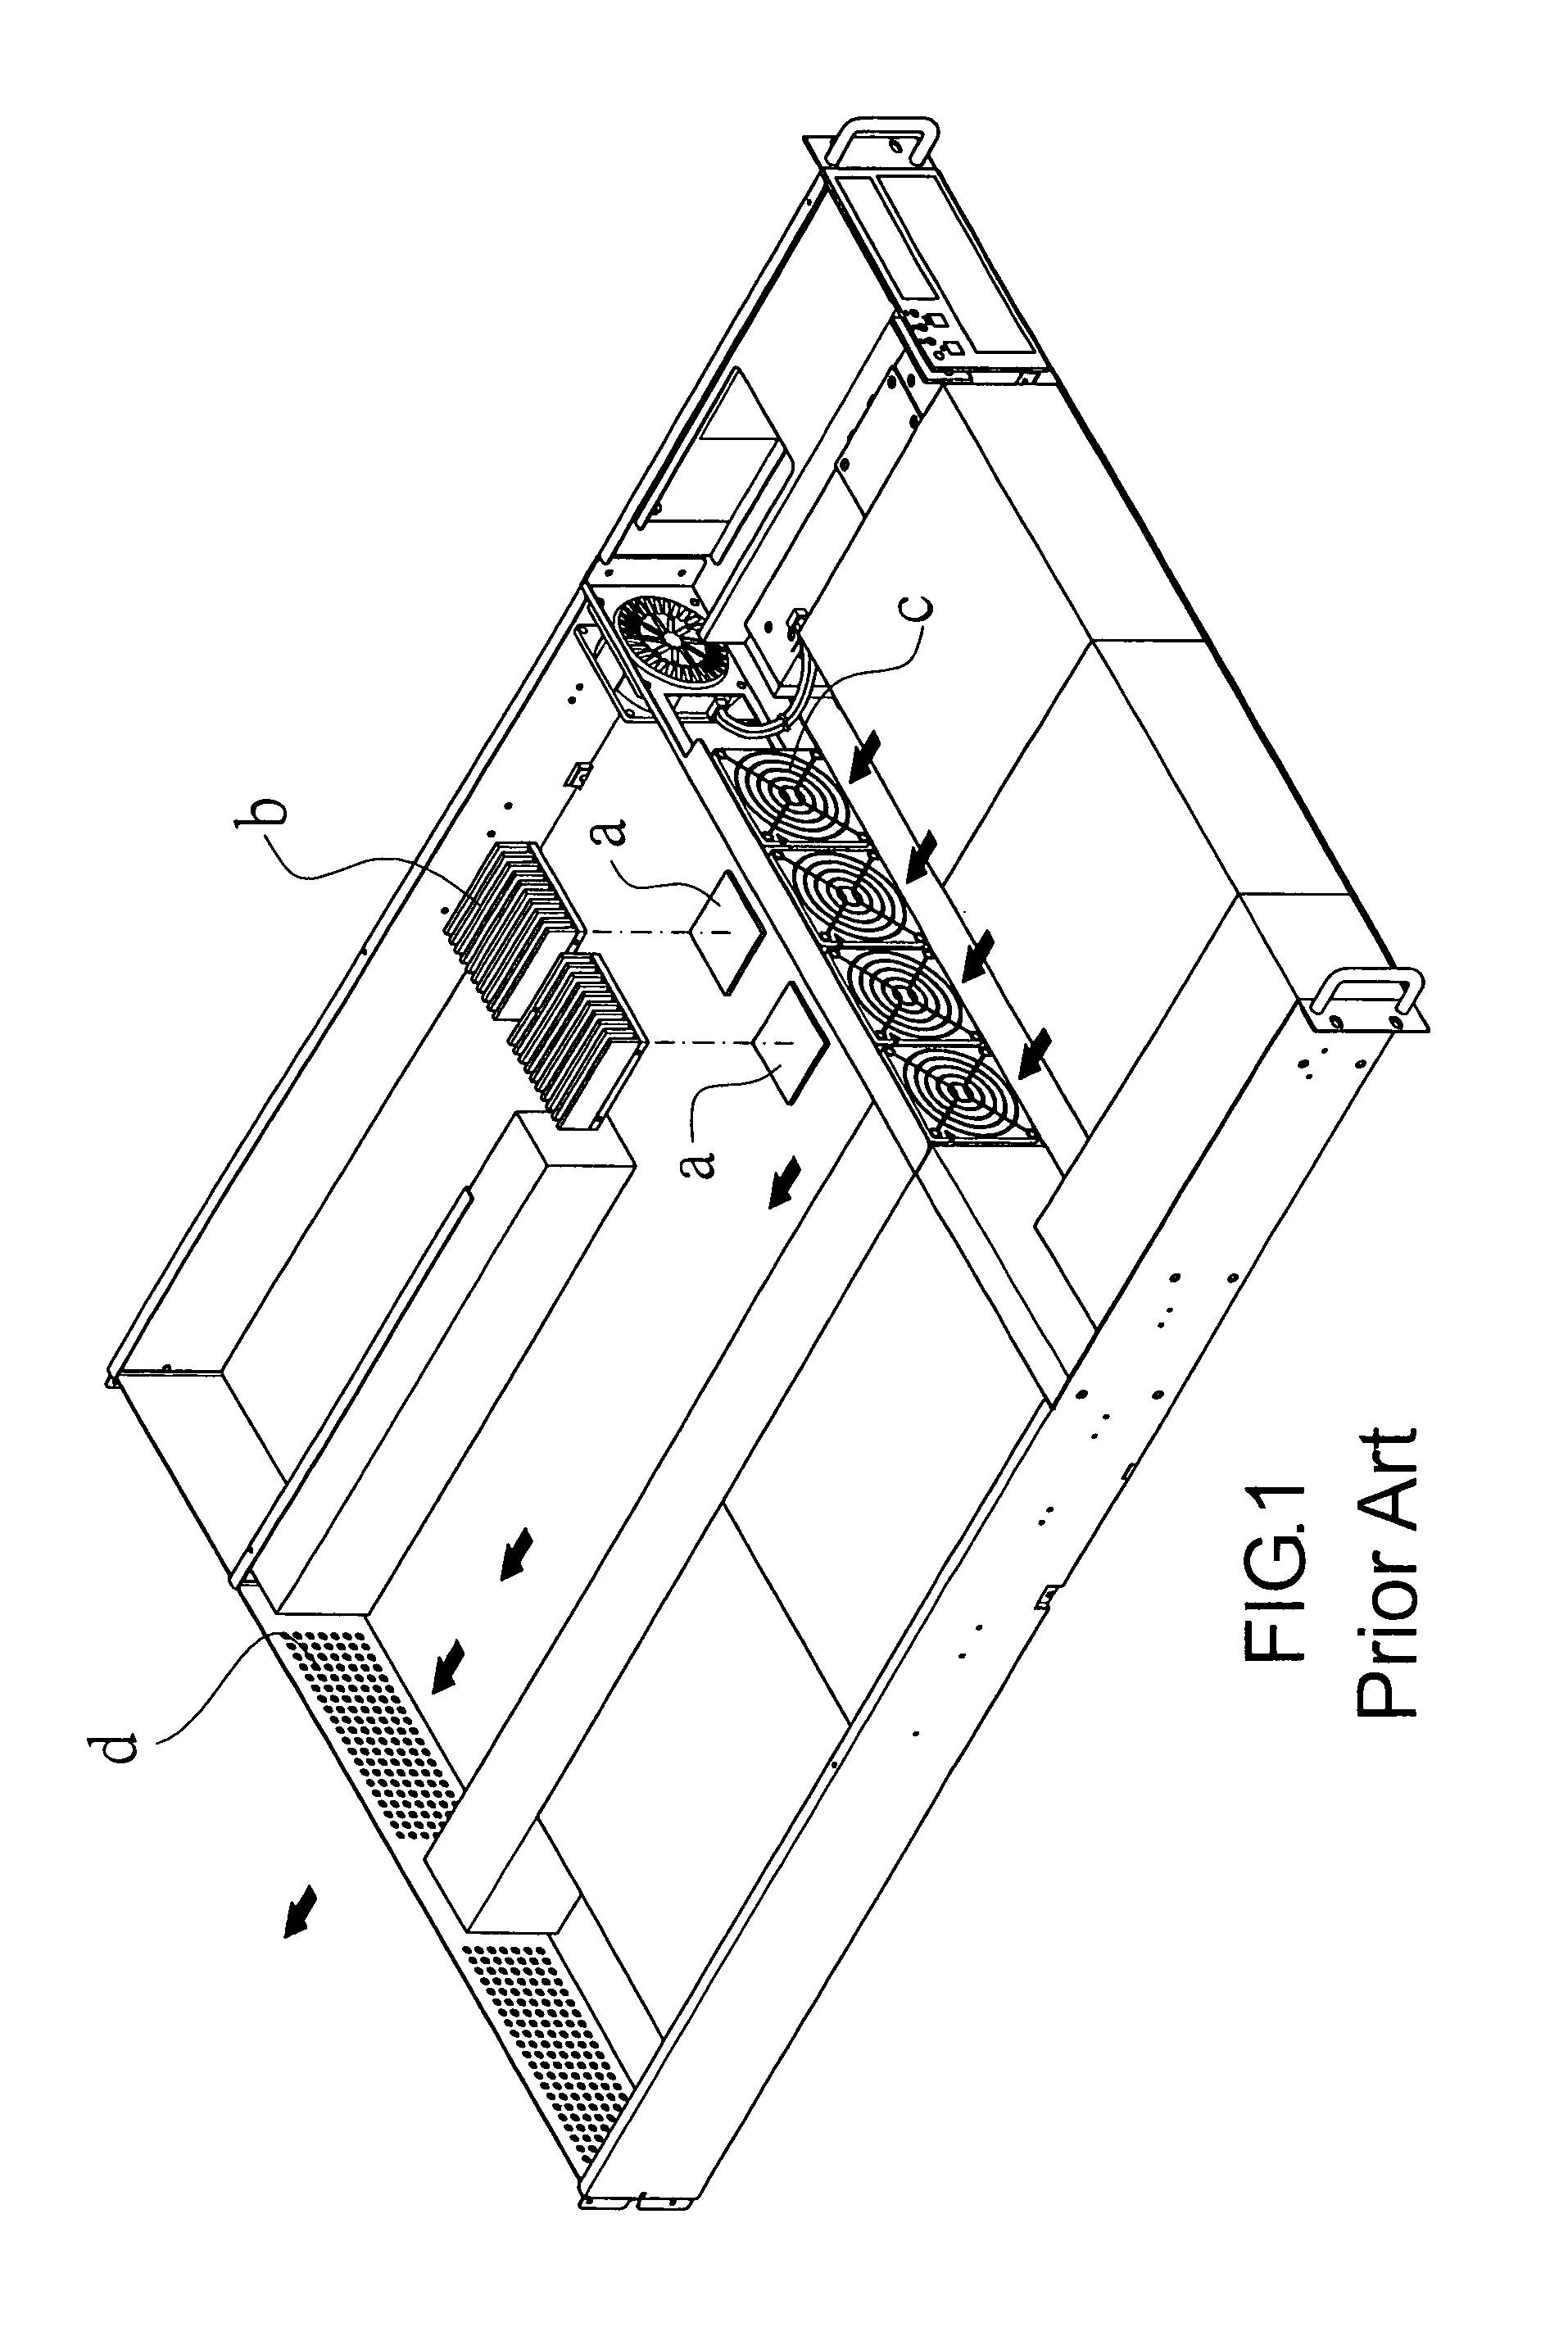 Fan cover heat dissipation assembly for a host computer CPU